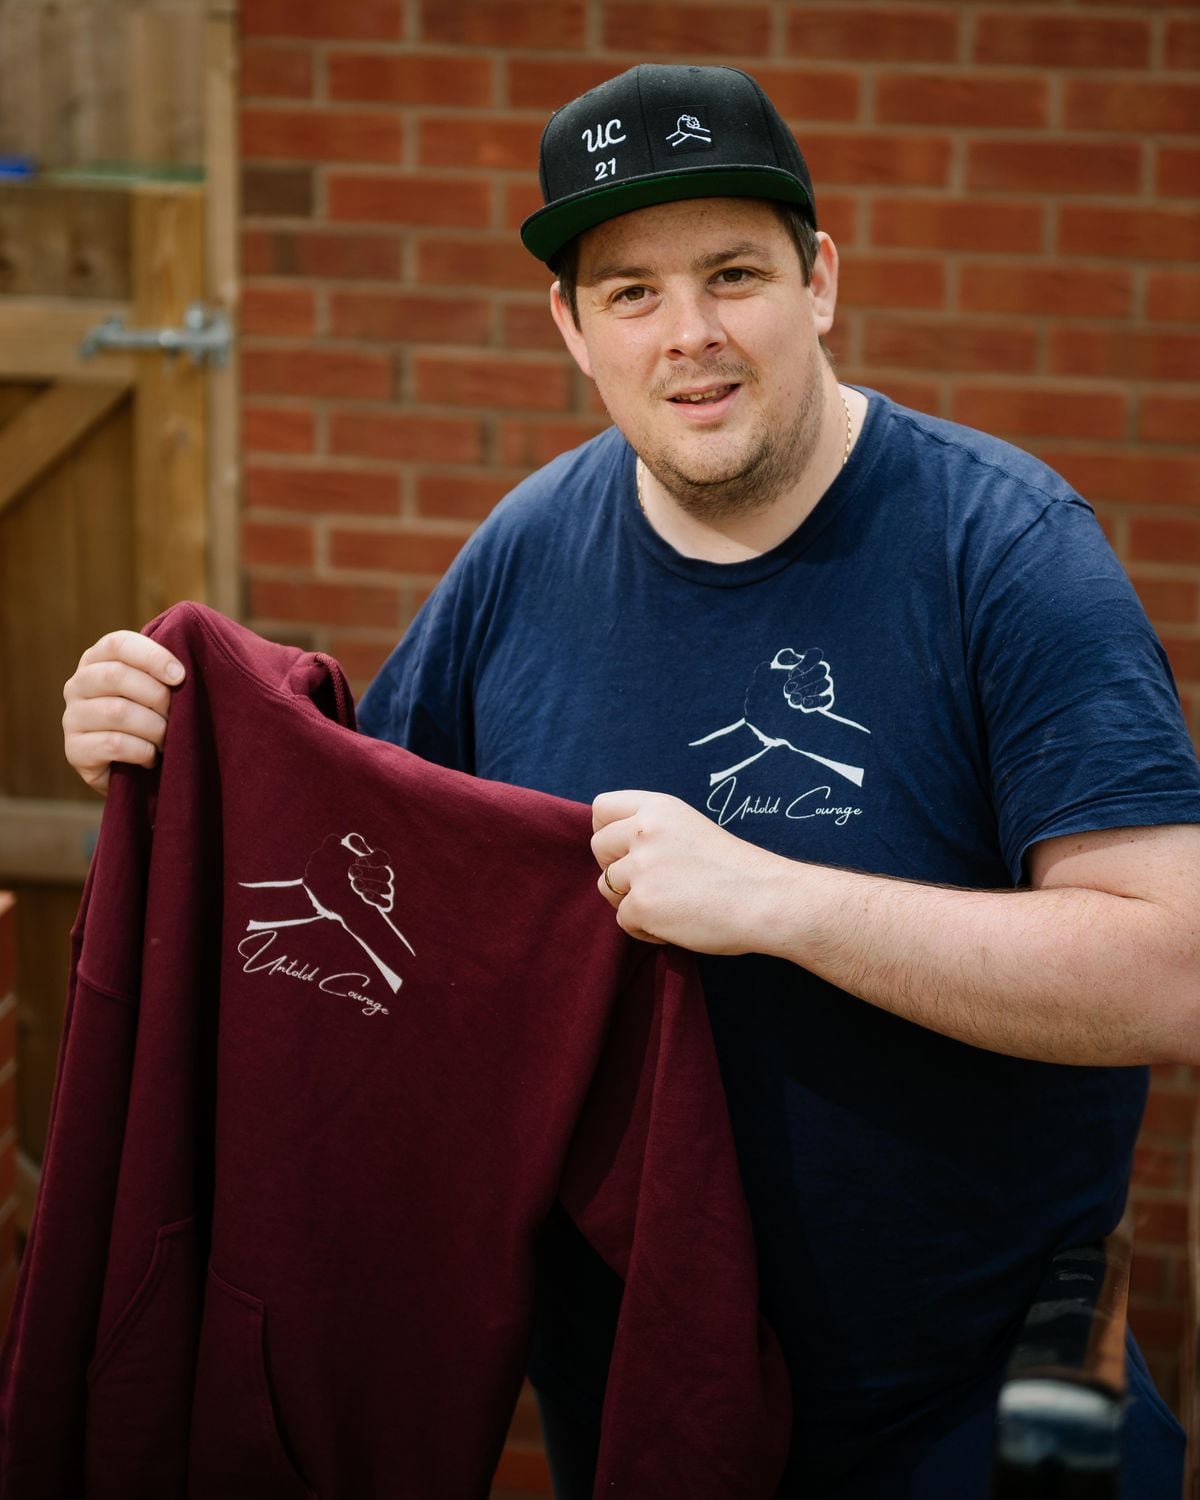 Mark Manderfield has set up his own clothing brand, Untold Courage, to raise awareness of men's mental health